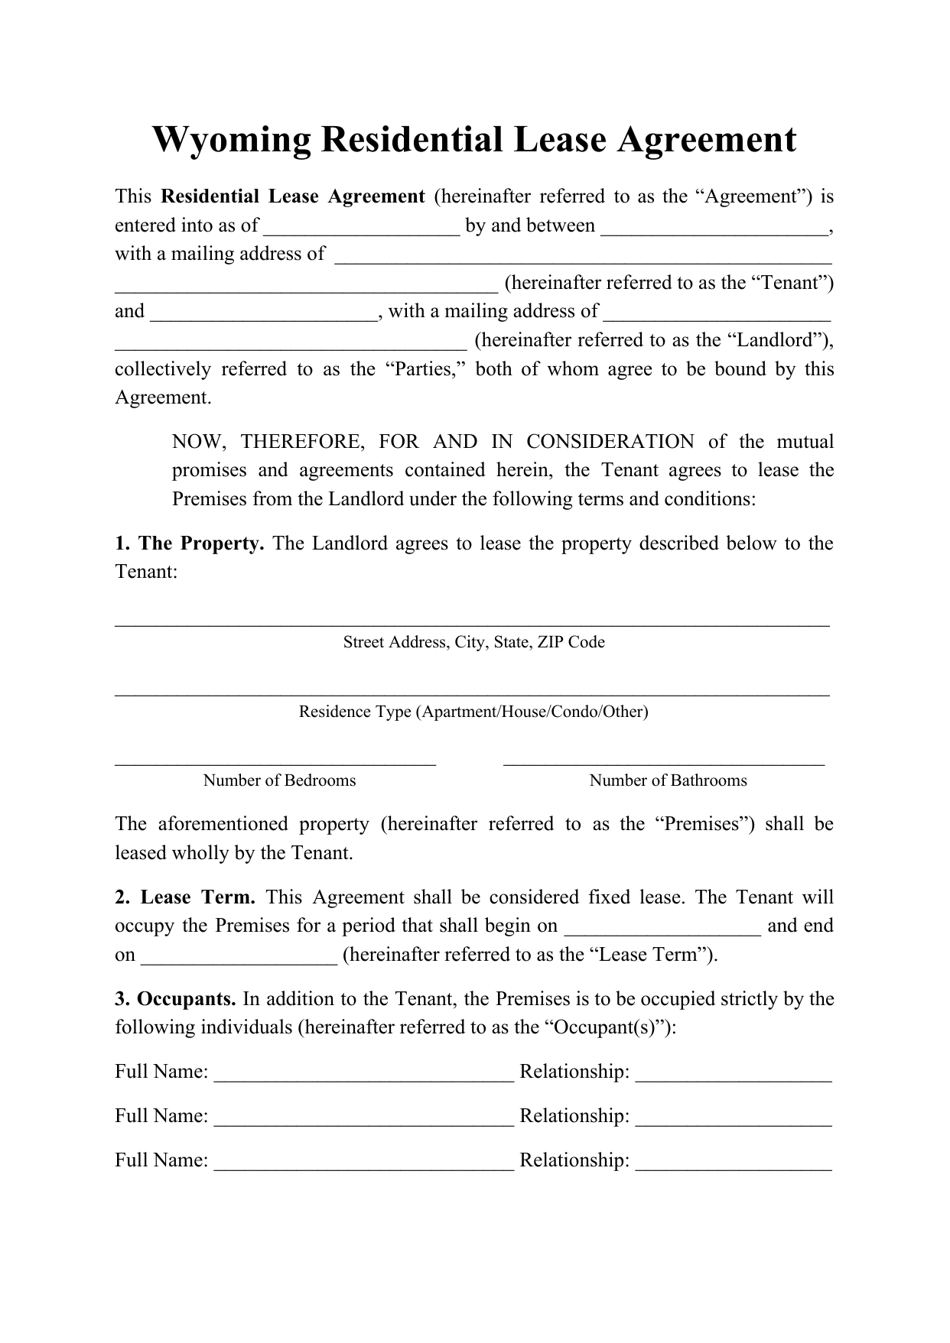 Residential Lease Agreement Template - Wyoming, Page 1